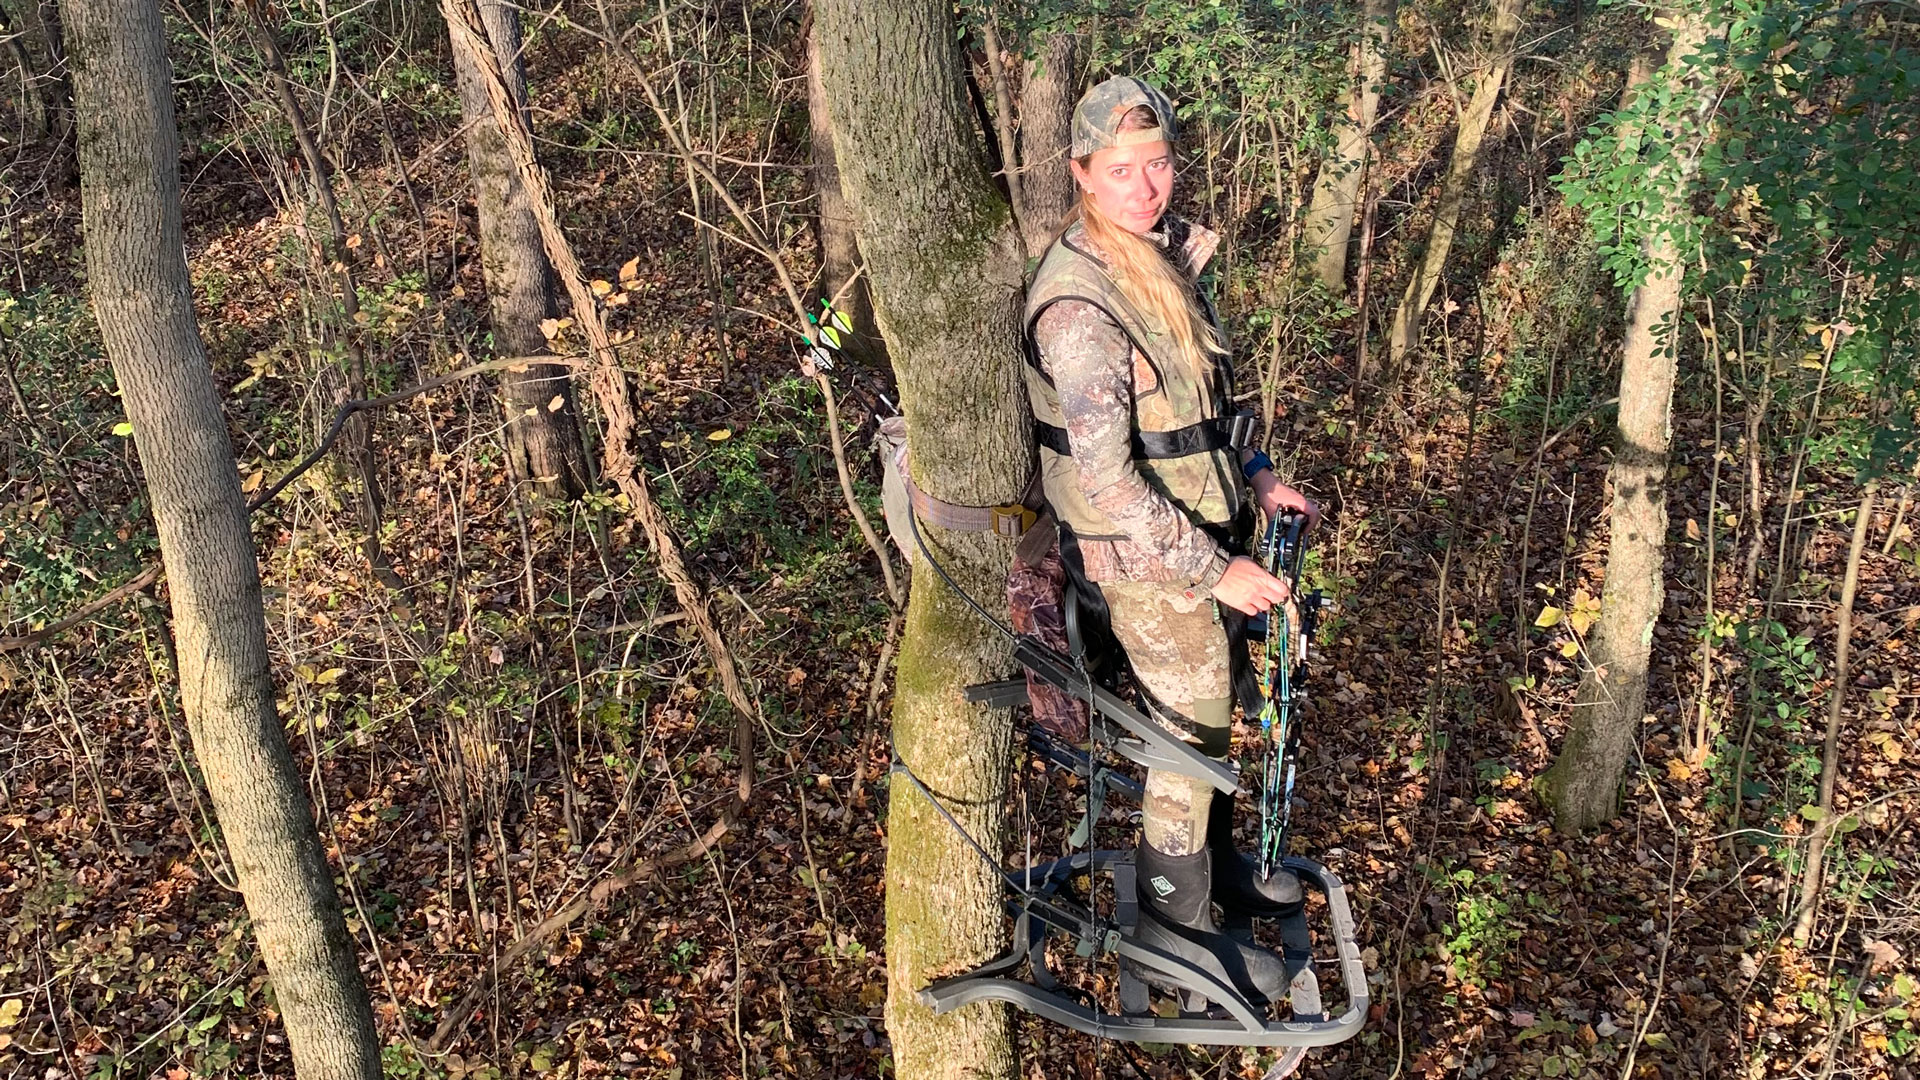 Amy Reid waits in a treestand